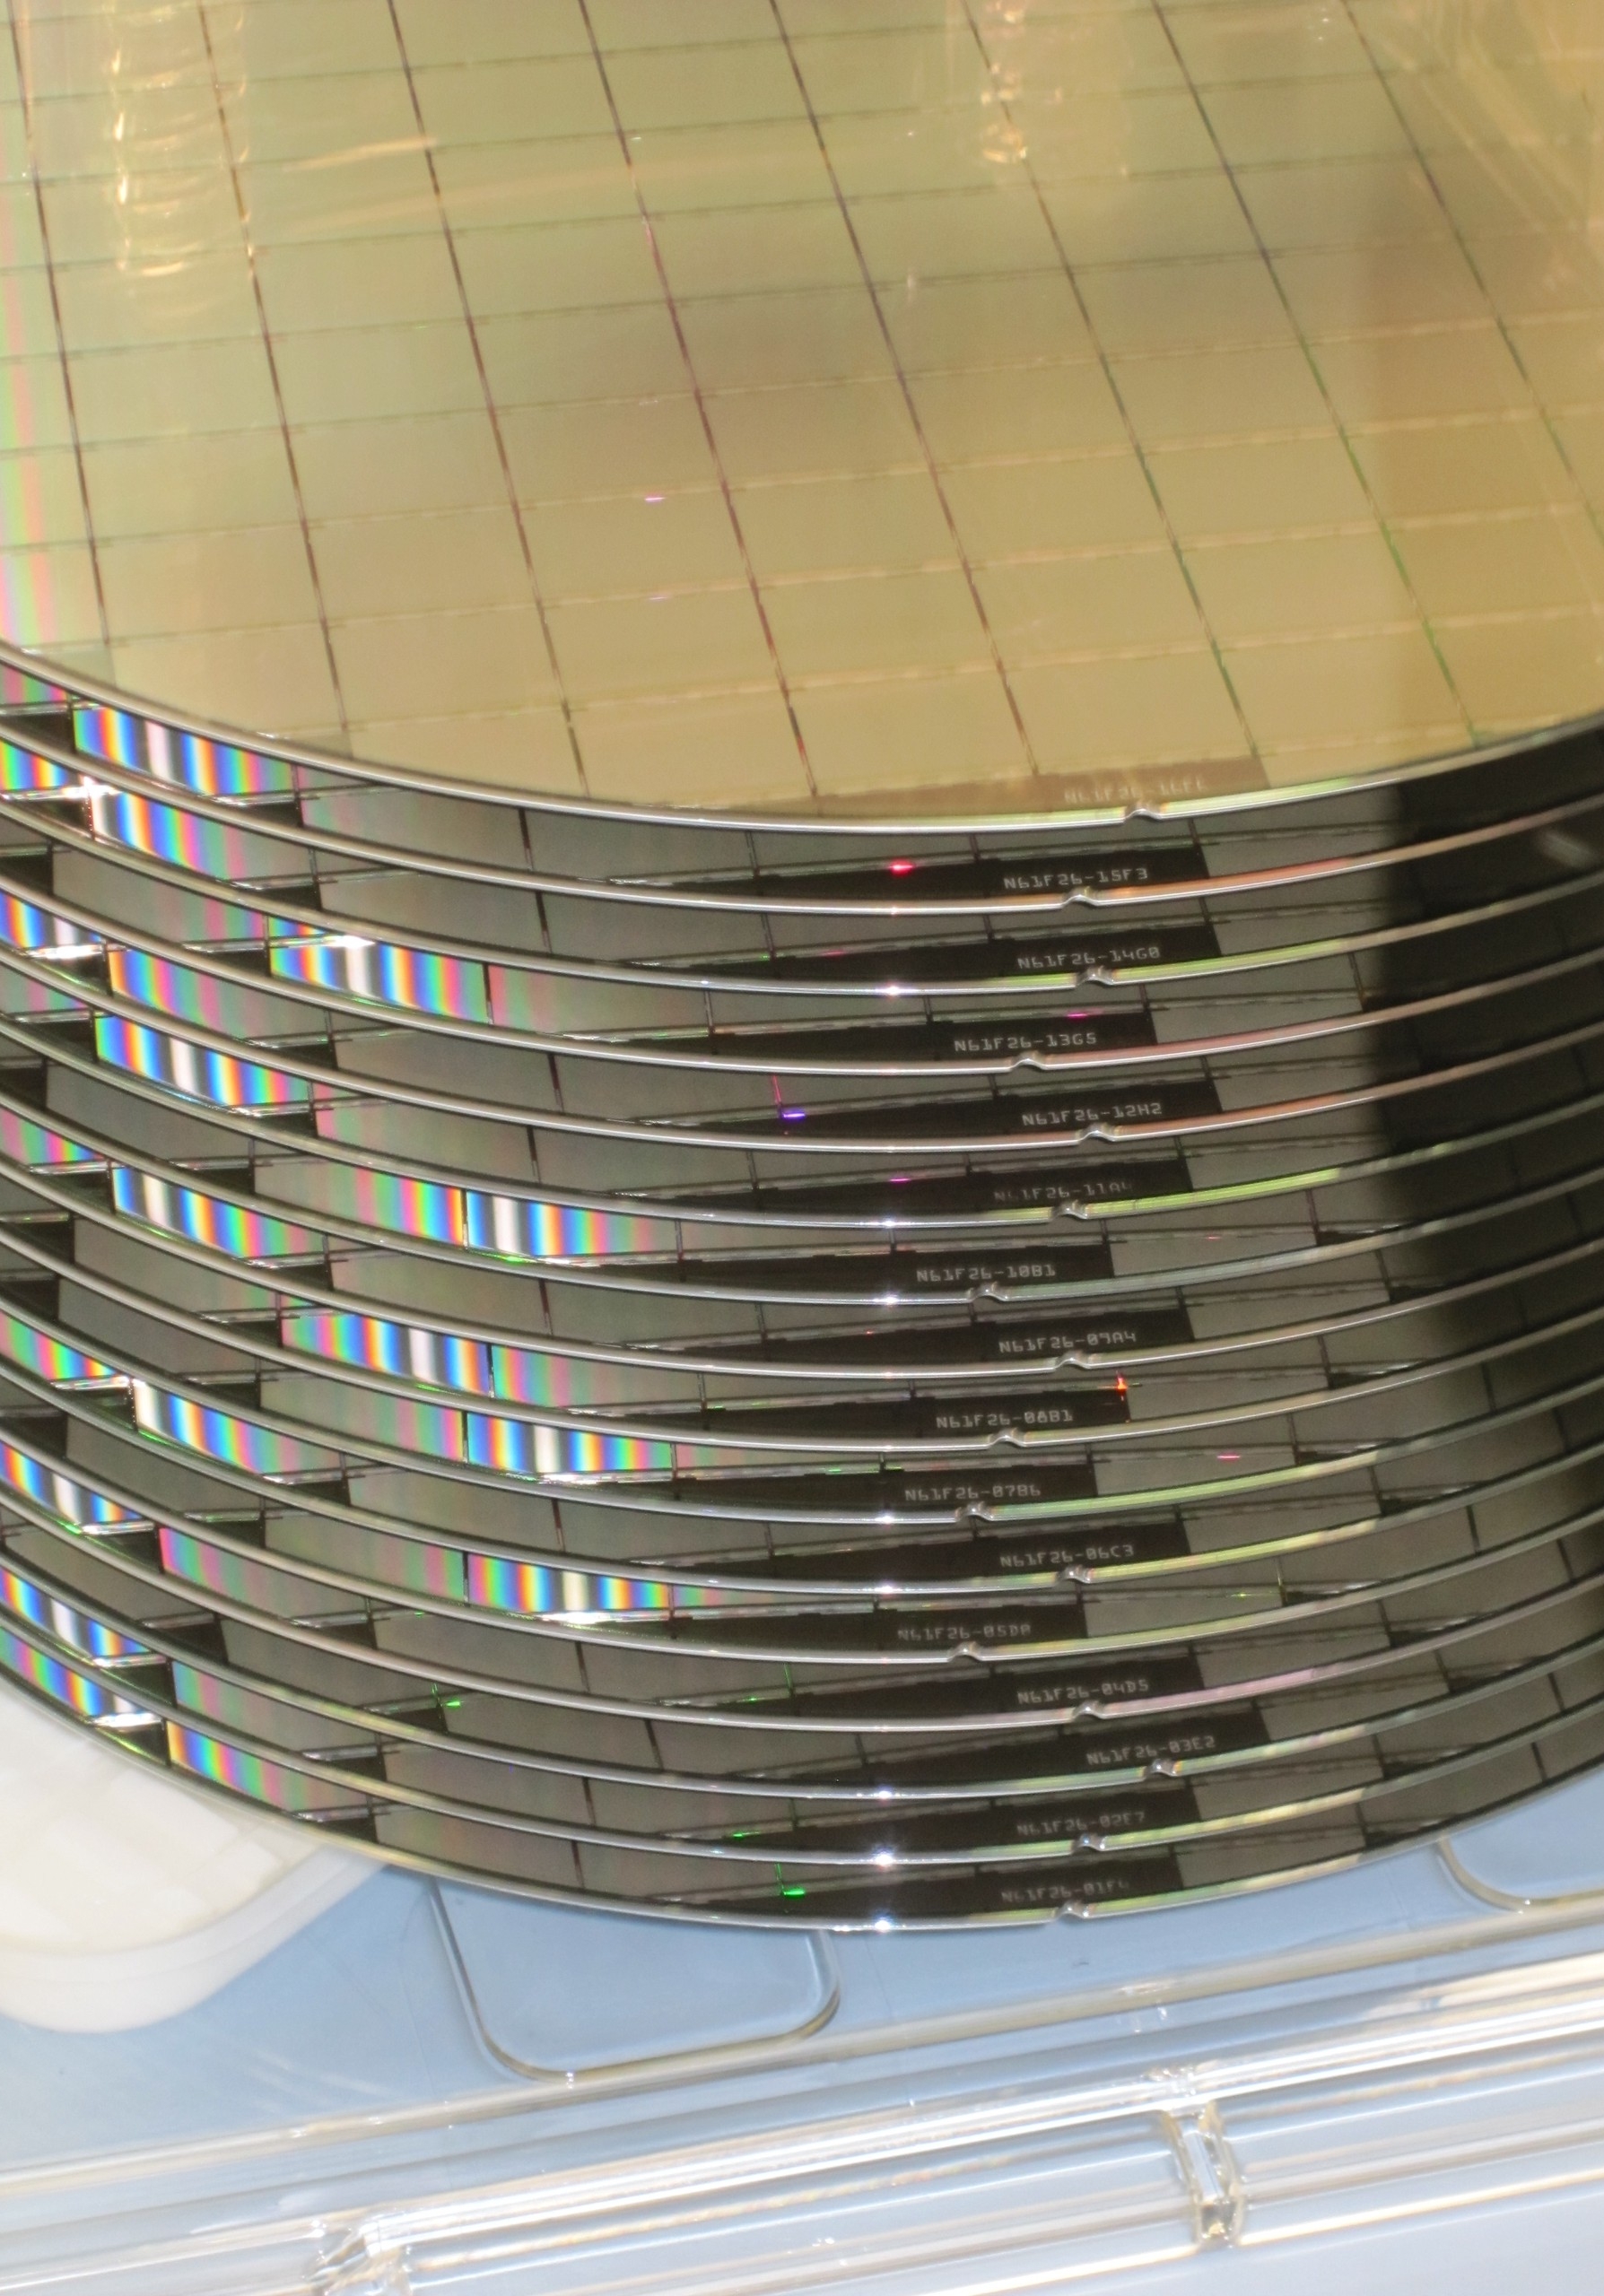 16 CROCv2 wafers arrive in Torino for testing